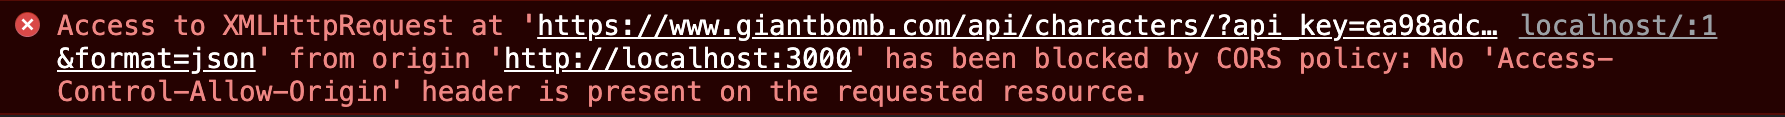 Access to XMLHttpRequest at 'https://www.giantbomb.com/api/characters/?api_key=ea98adc...&format=json' from origin 'http://localhost:3000' has been blocked by CORS policy: No 'Access-Control-Allow-Origin' header is present on the requested resource.